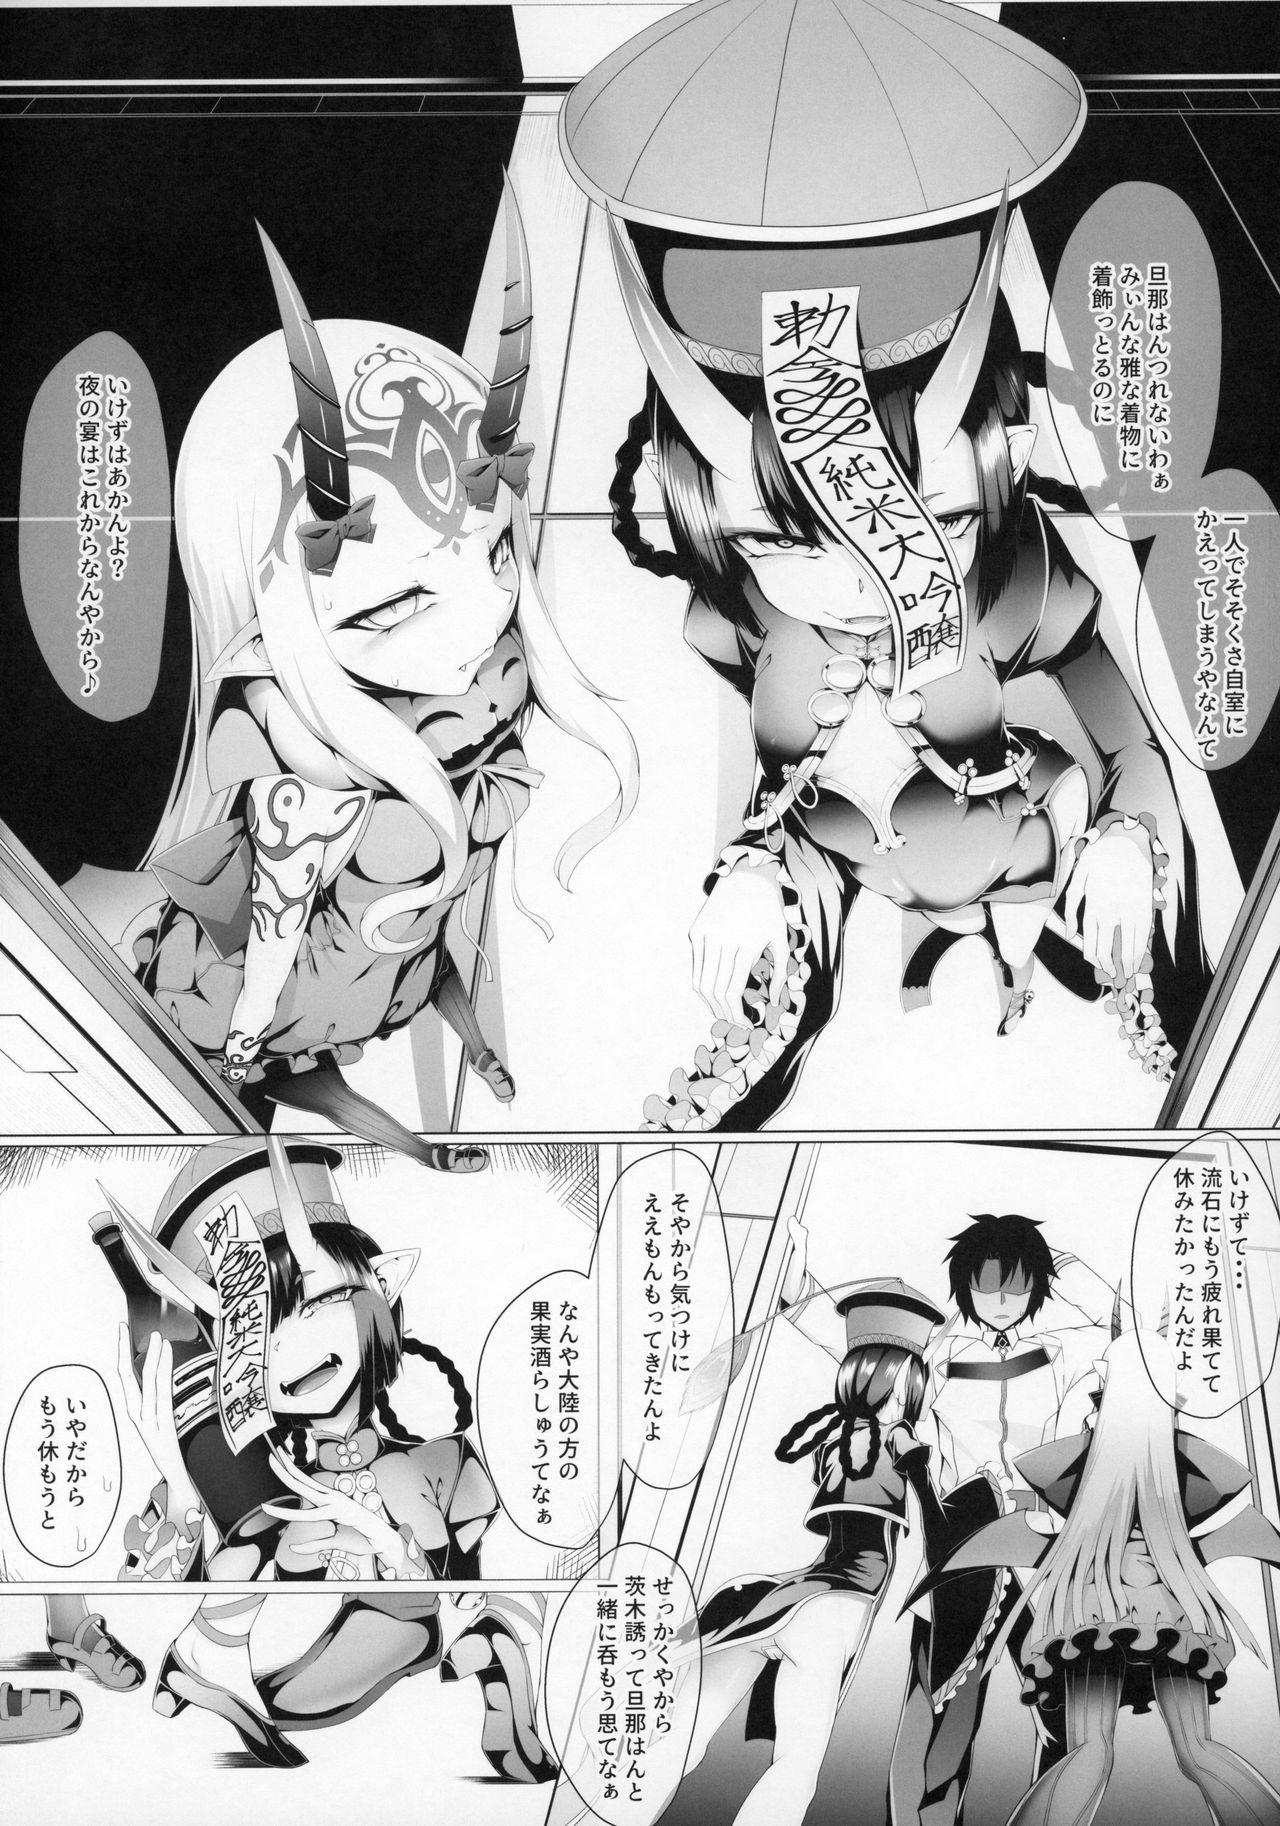 Asian M.P. Vol. 21 - Fate grand order Pack - Page 3